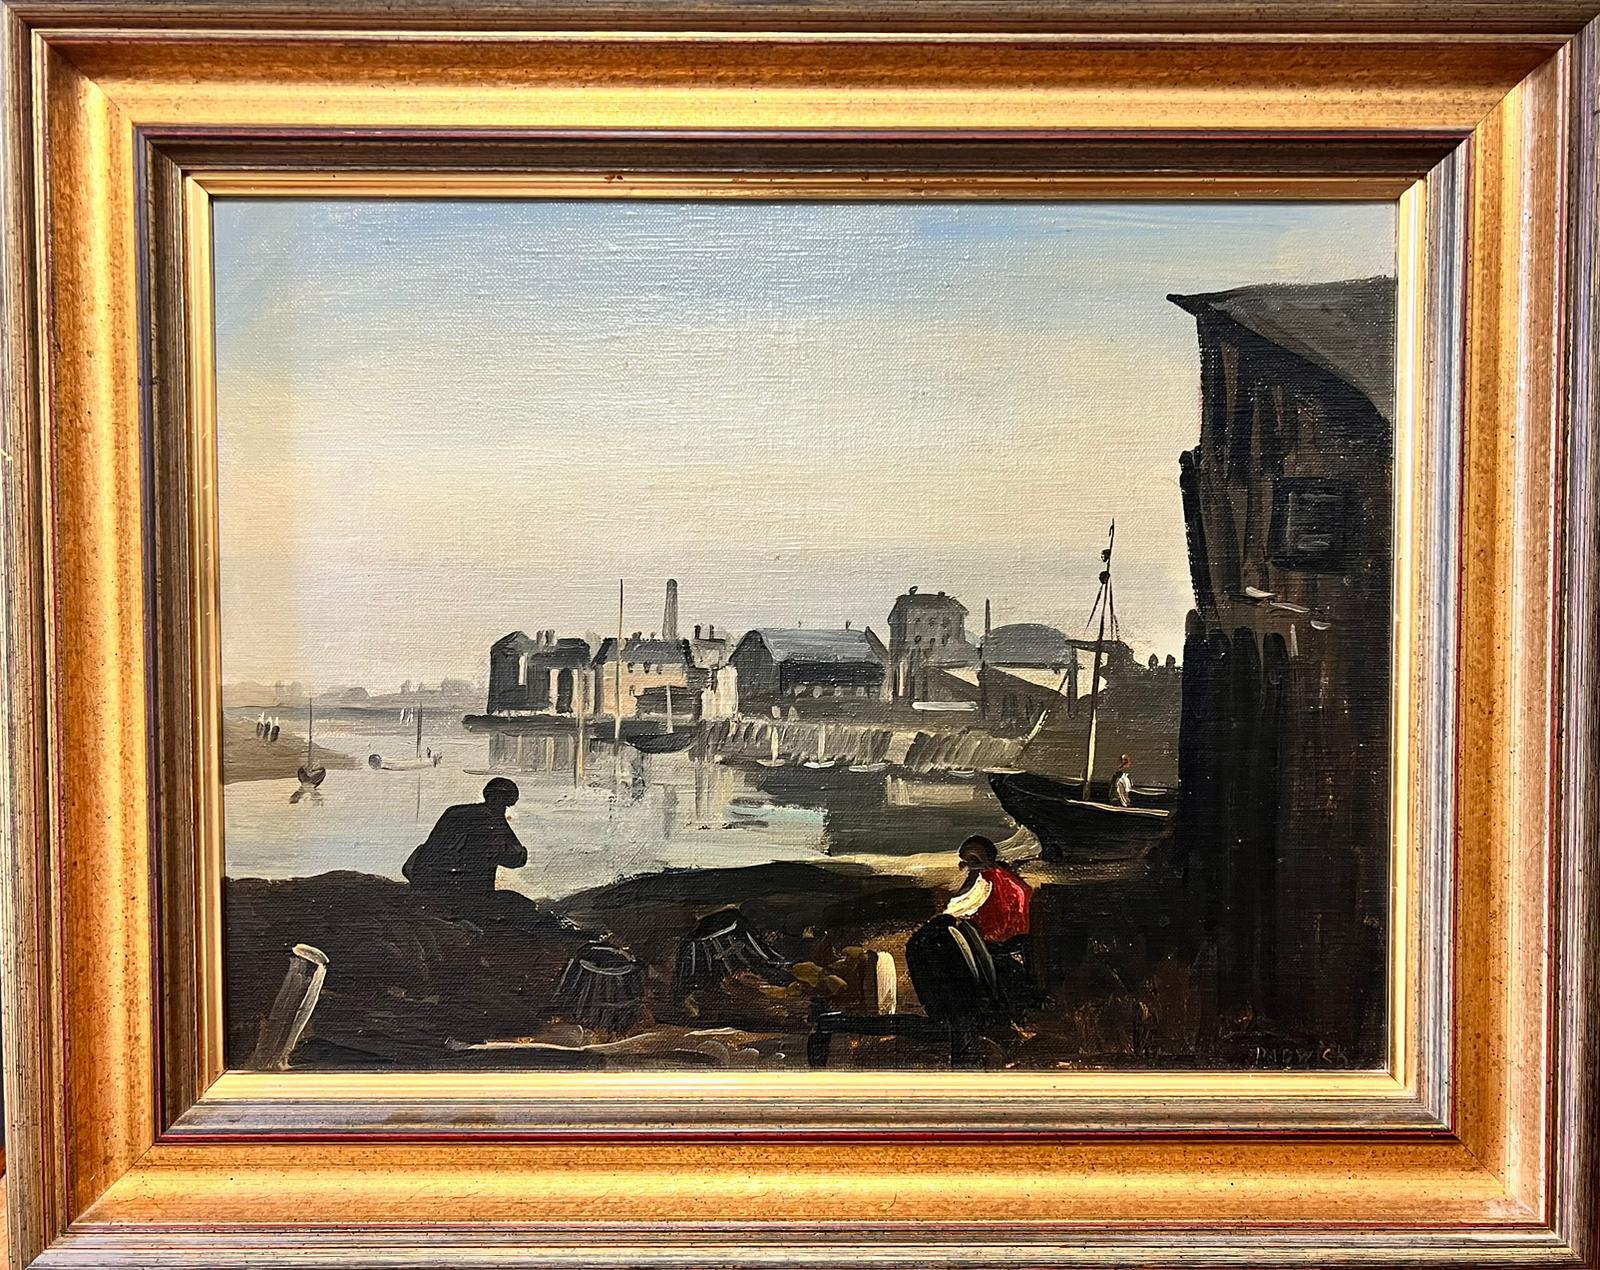 Harbour Scene
Phillip Hugh Padwick (1876 -1958)
signed oil painting on board, framed
framed: 16 x 19.5 inches
board: 12 x 16 inches
provenance: private collection, England 
condition: very good and sound condition